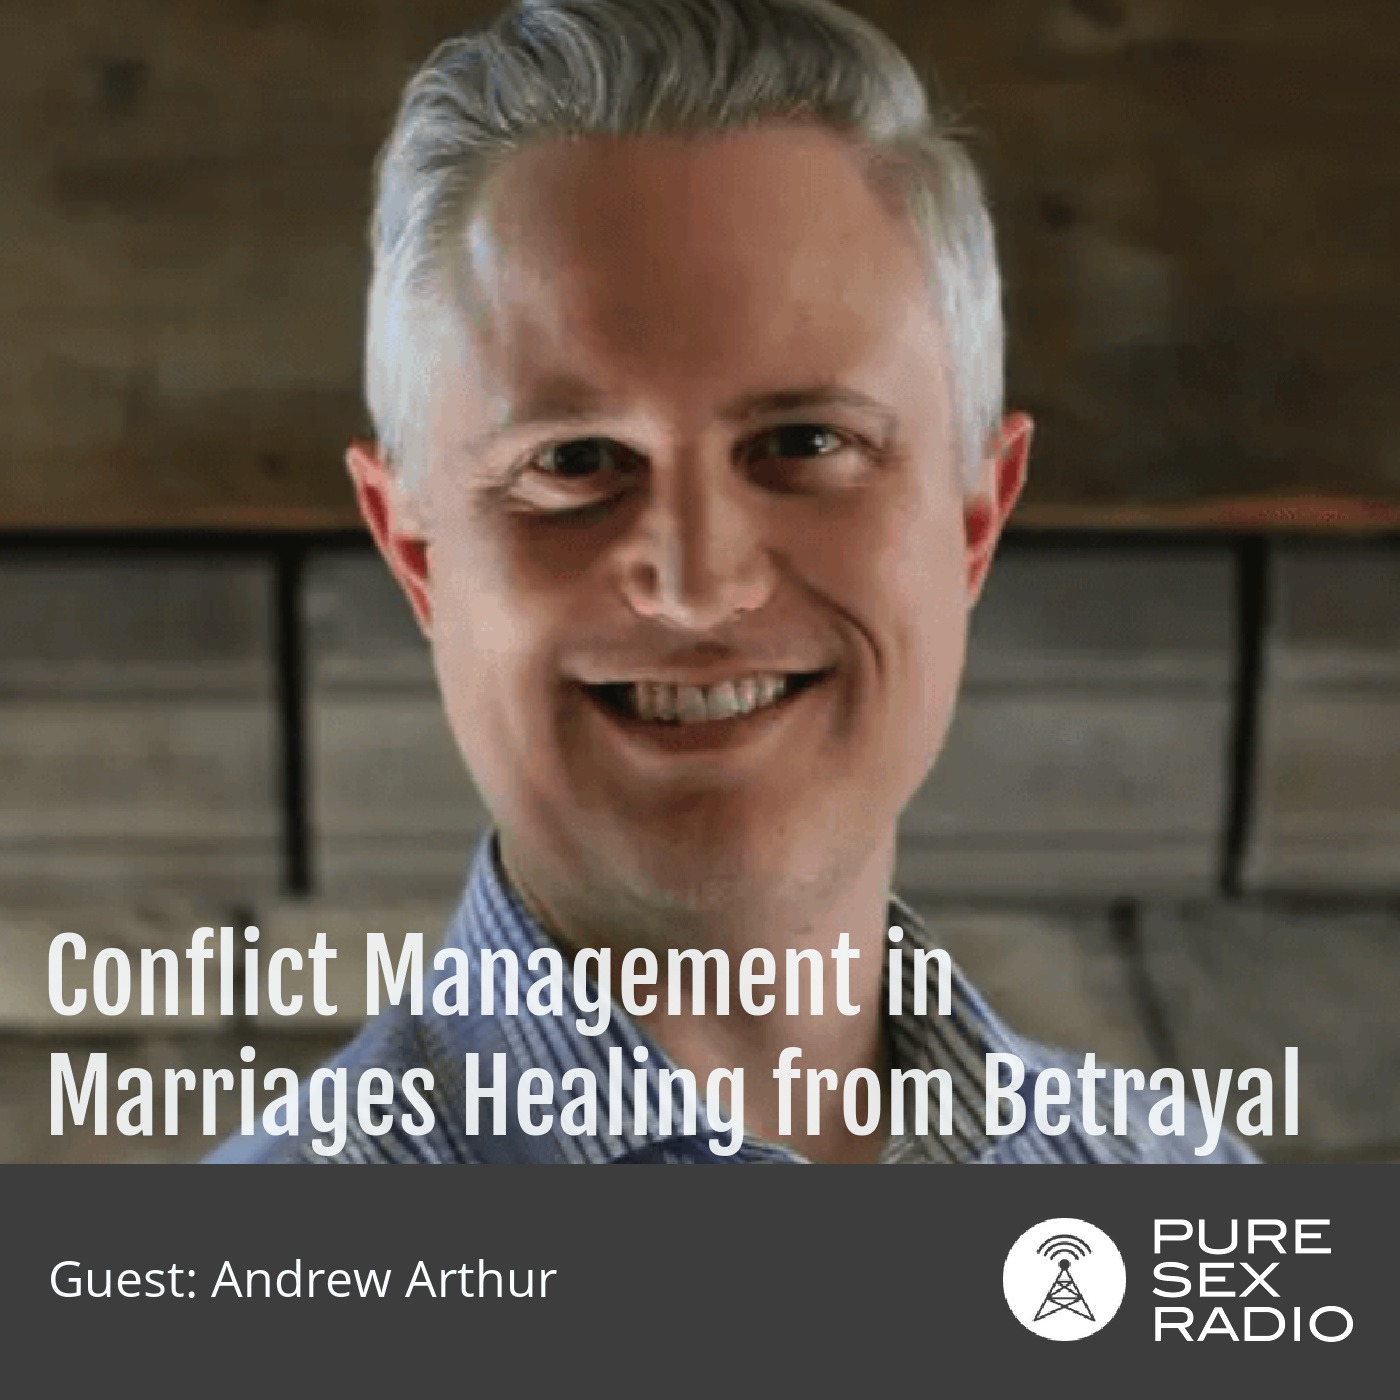 Conflict Management in Marriages Healing from Betrayal